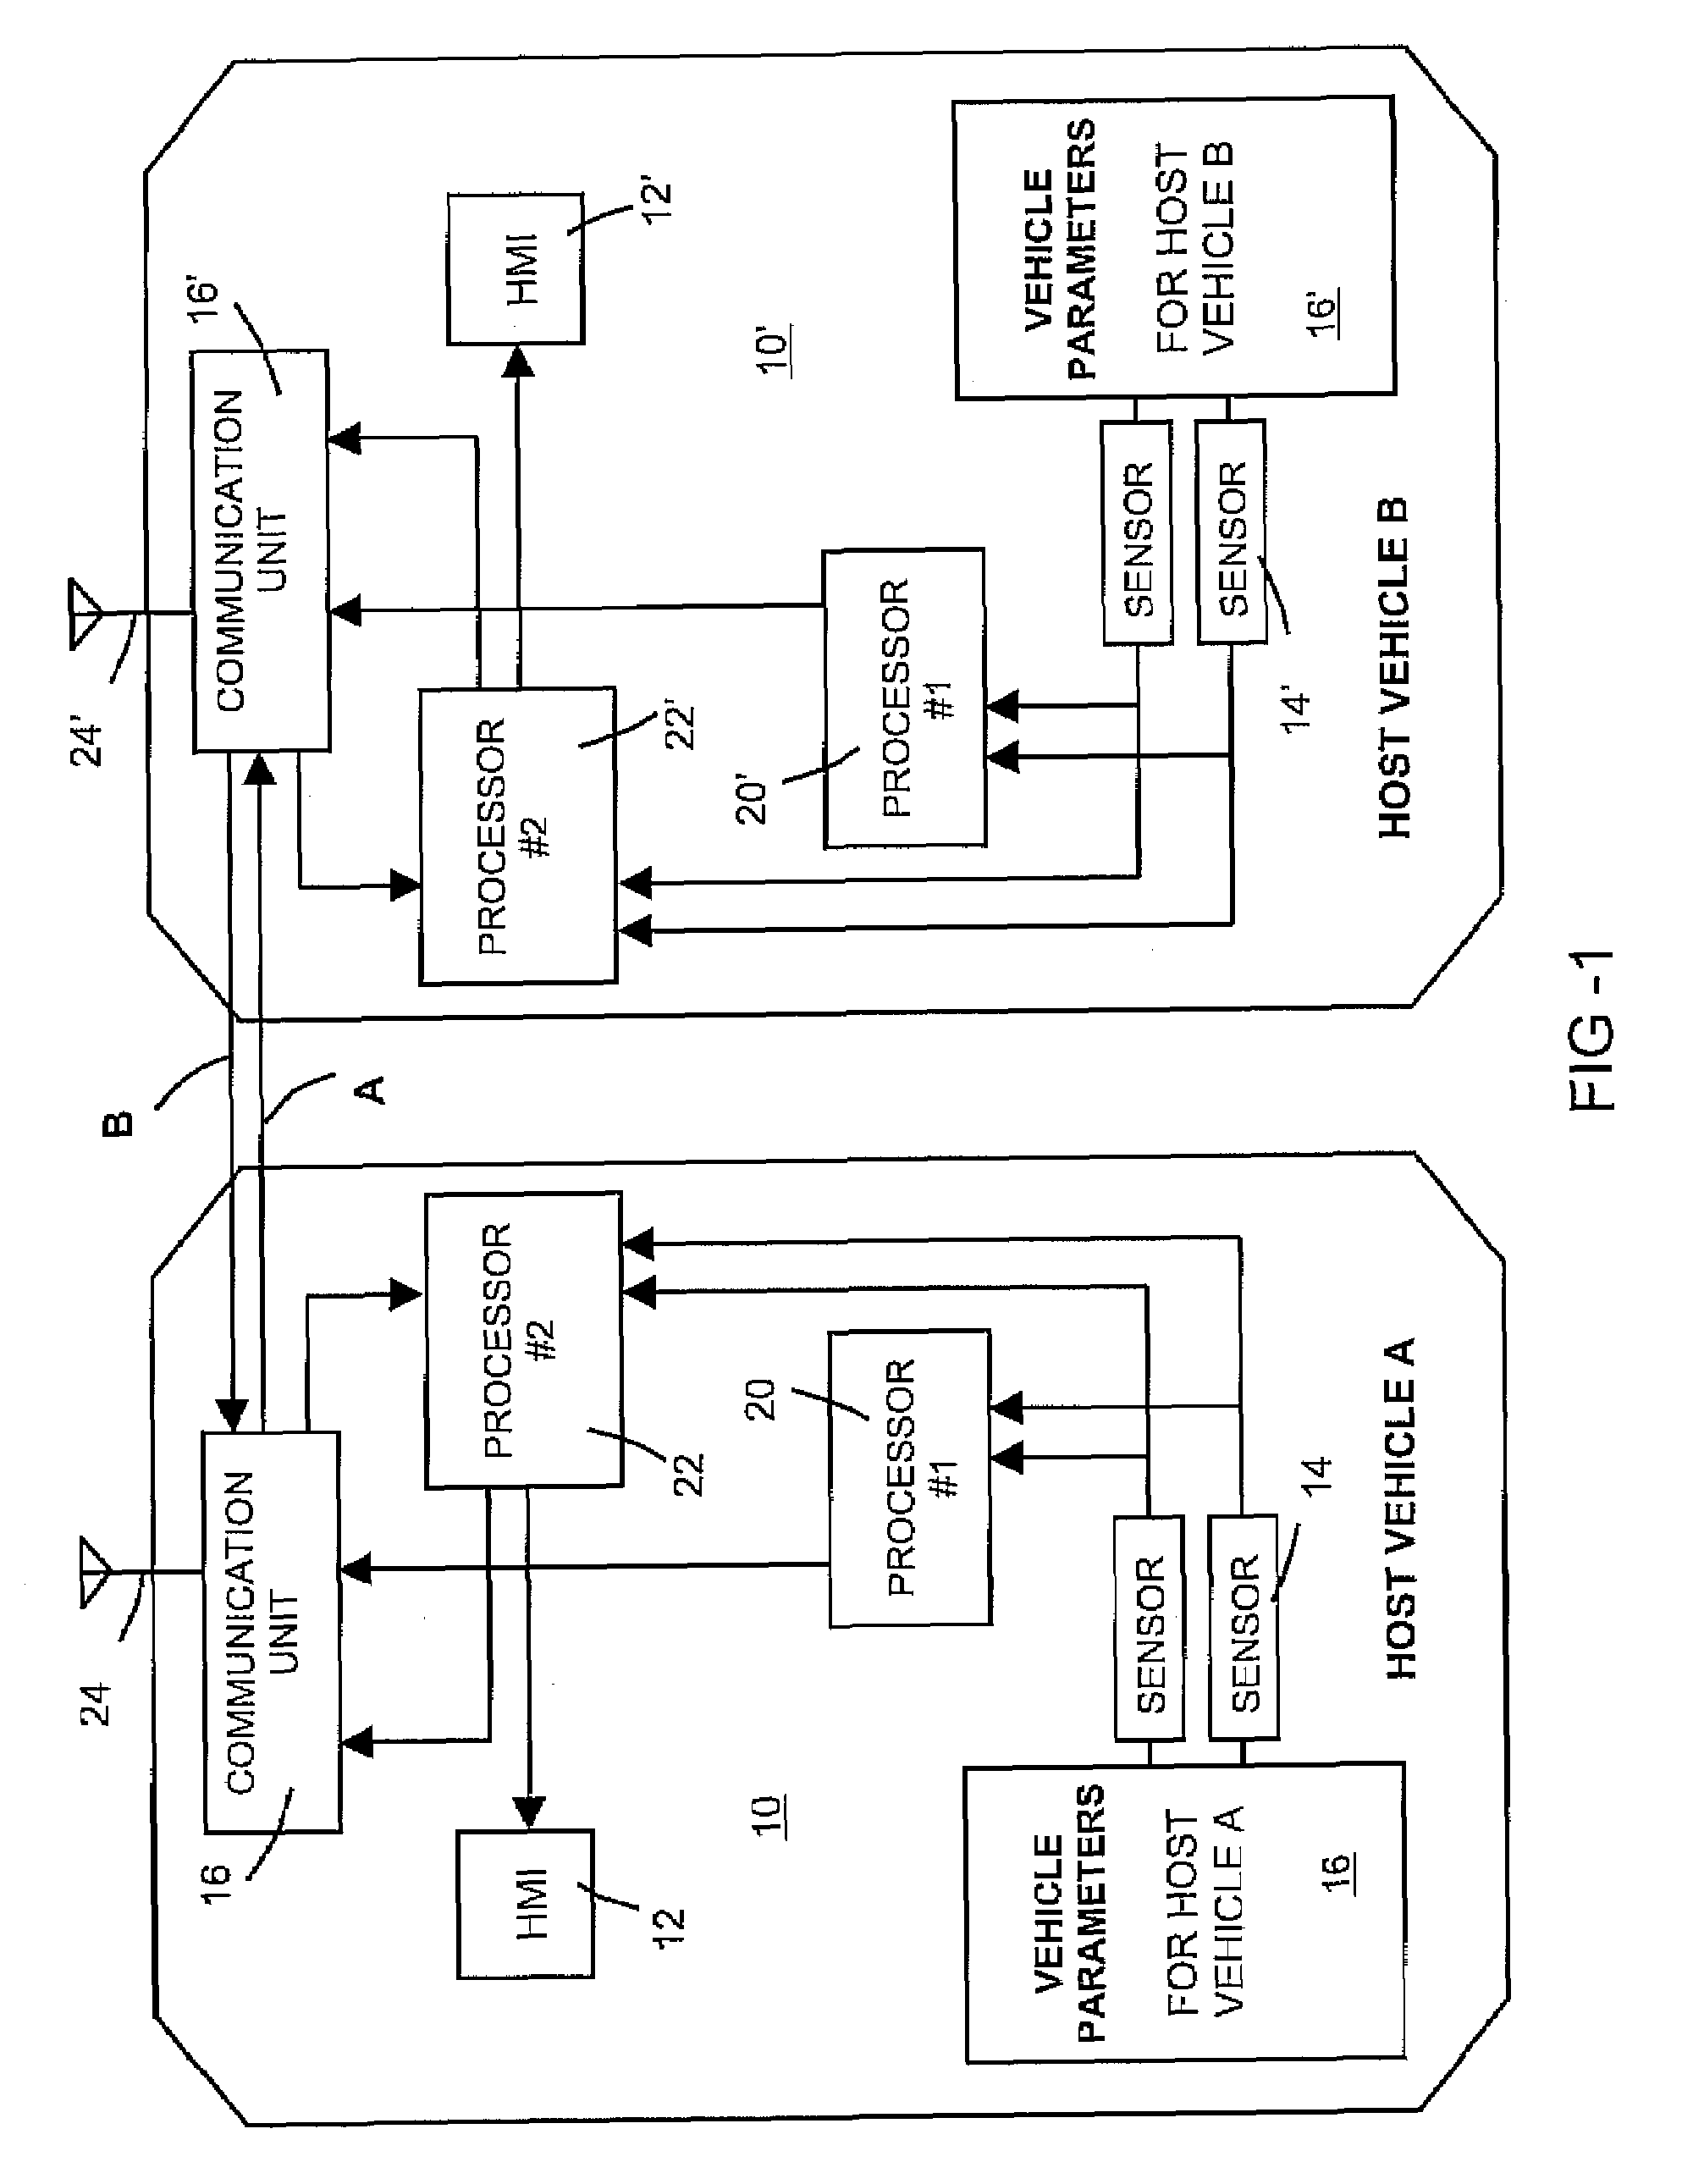 Method and apparatus for previewing conditions on a highway